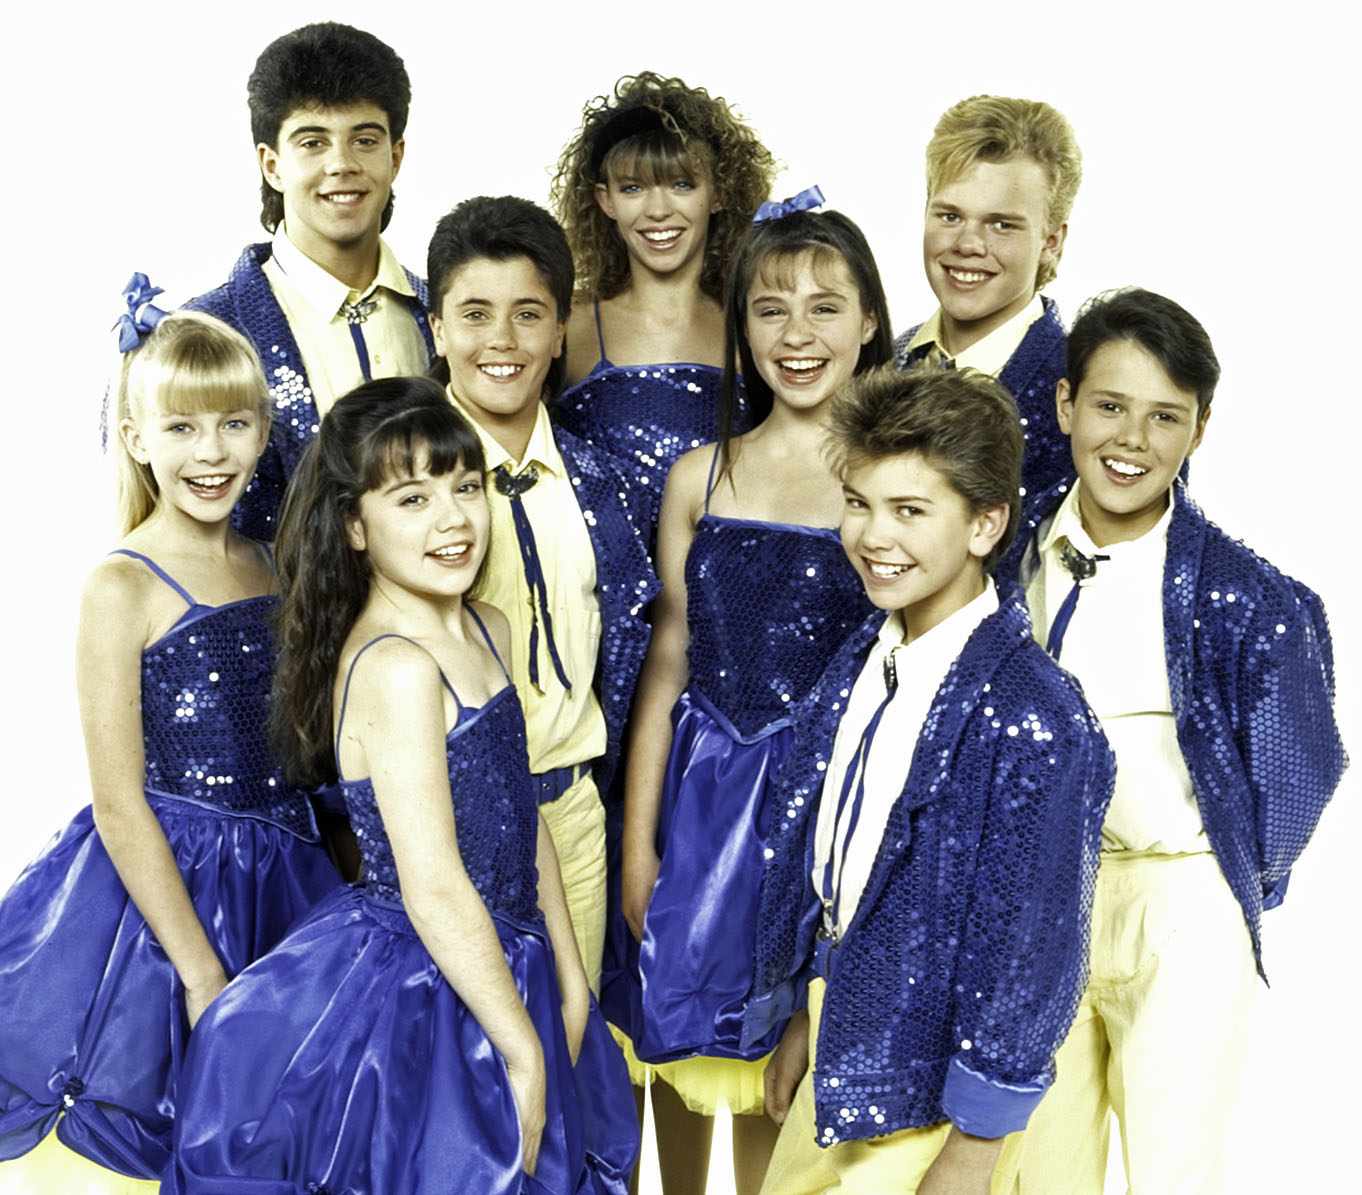 Members of the Young Talent Team wearing blue outfits.